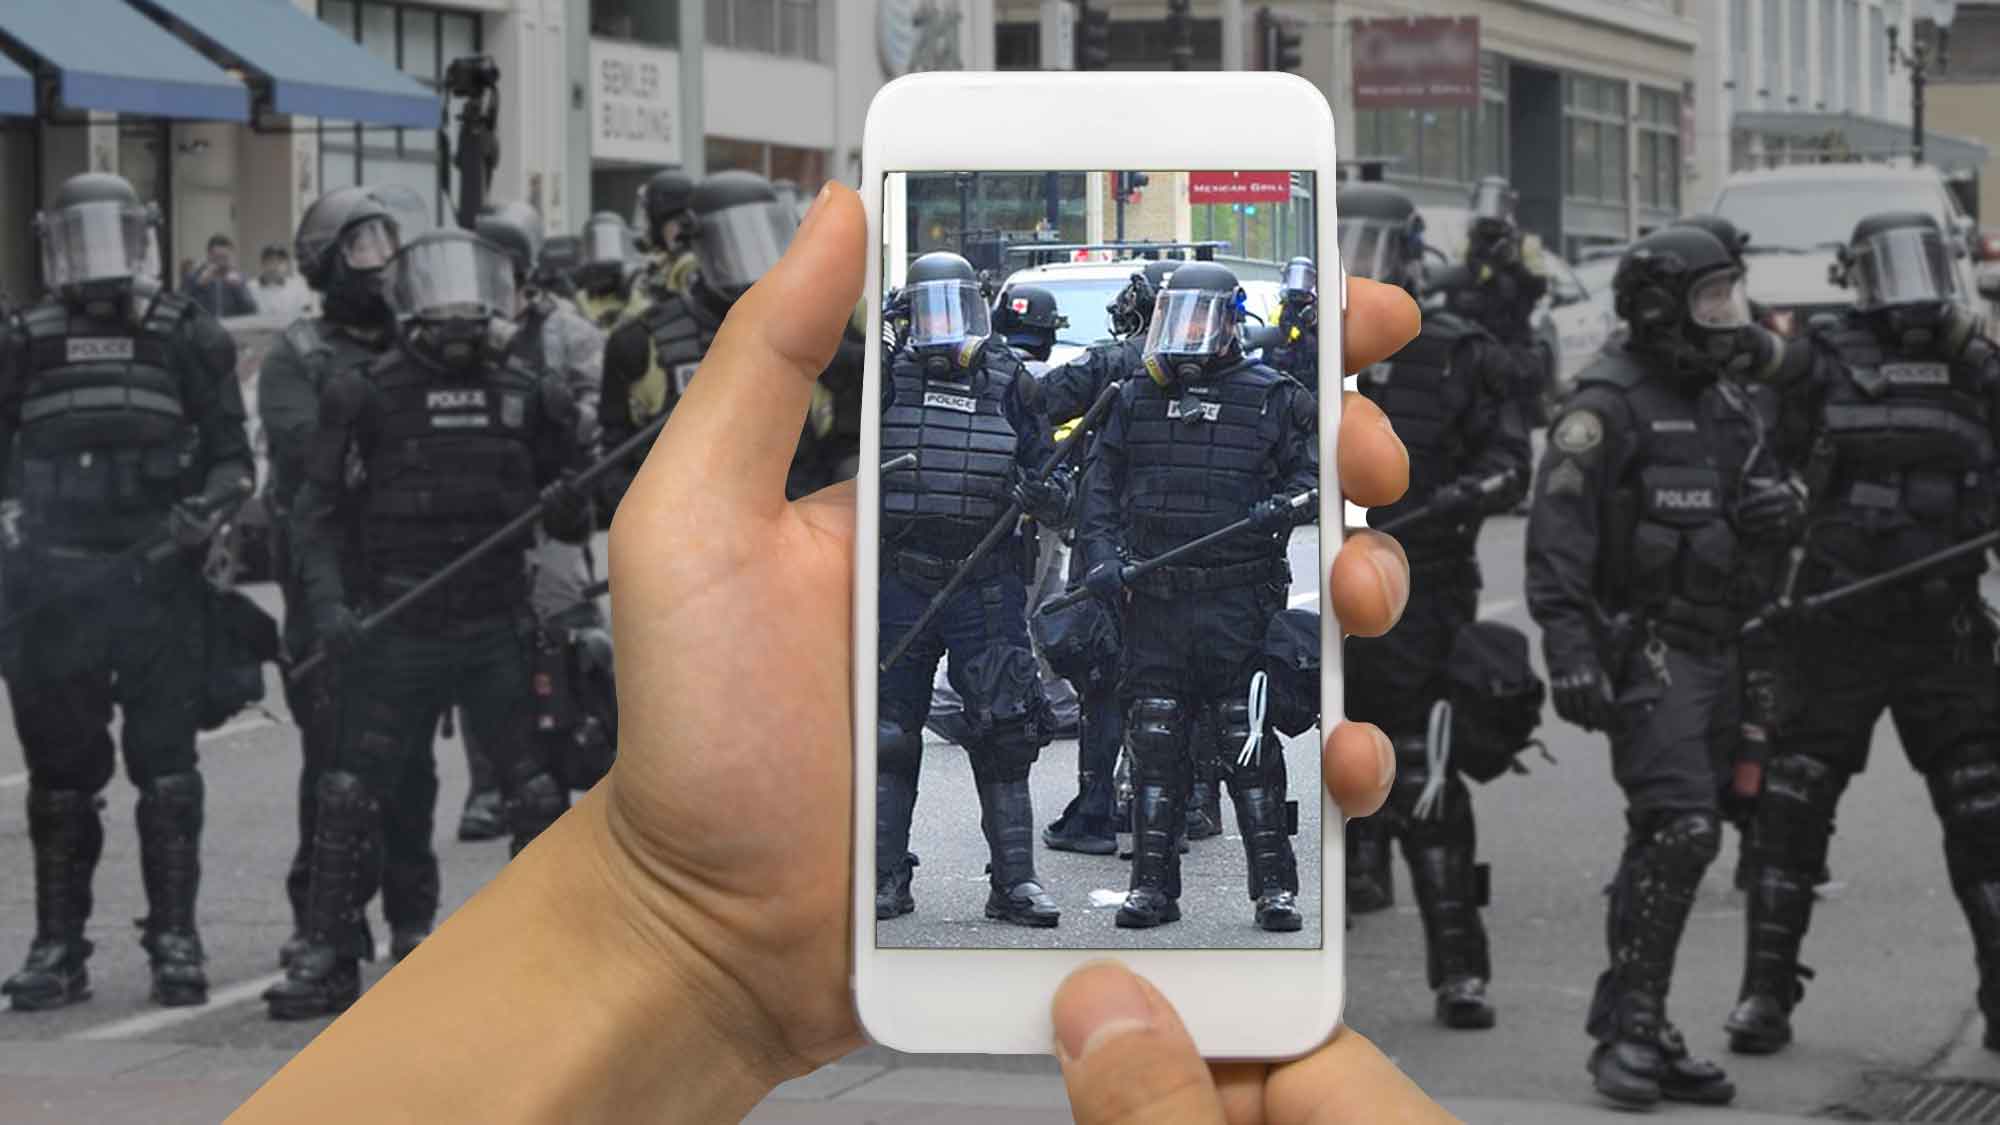 18 Useful Tips For Journalists Covering Civil Unrest Gatherings